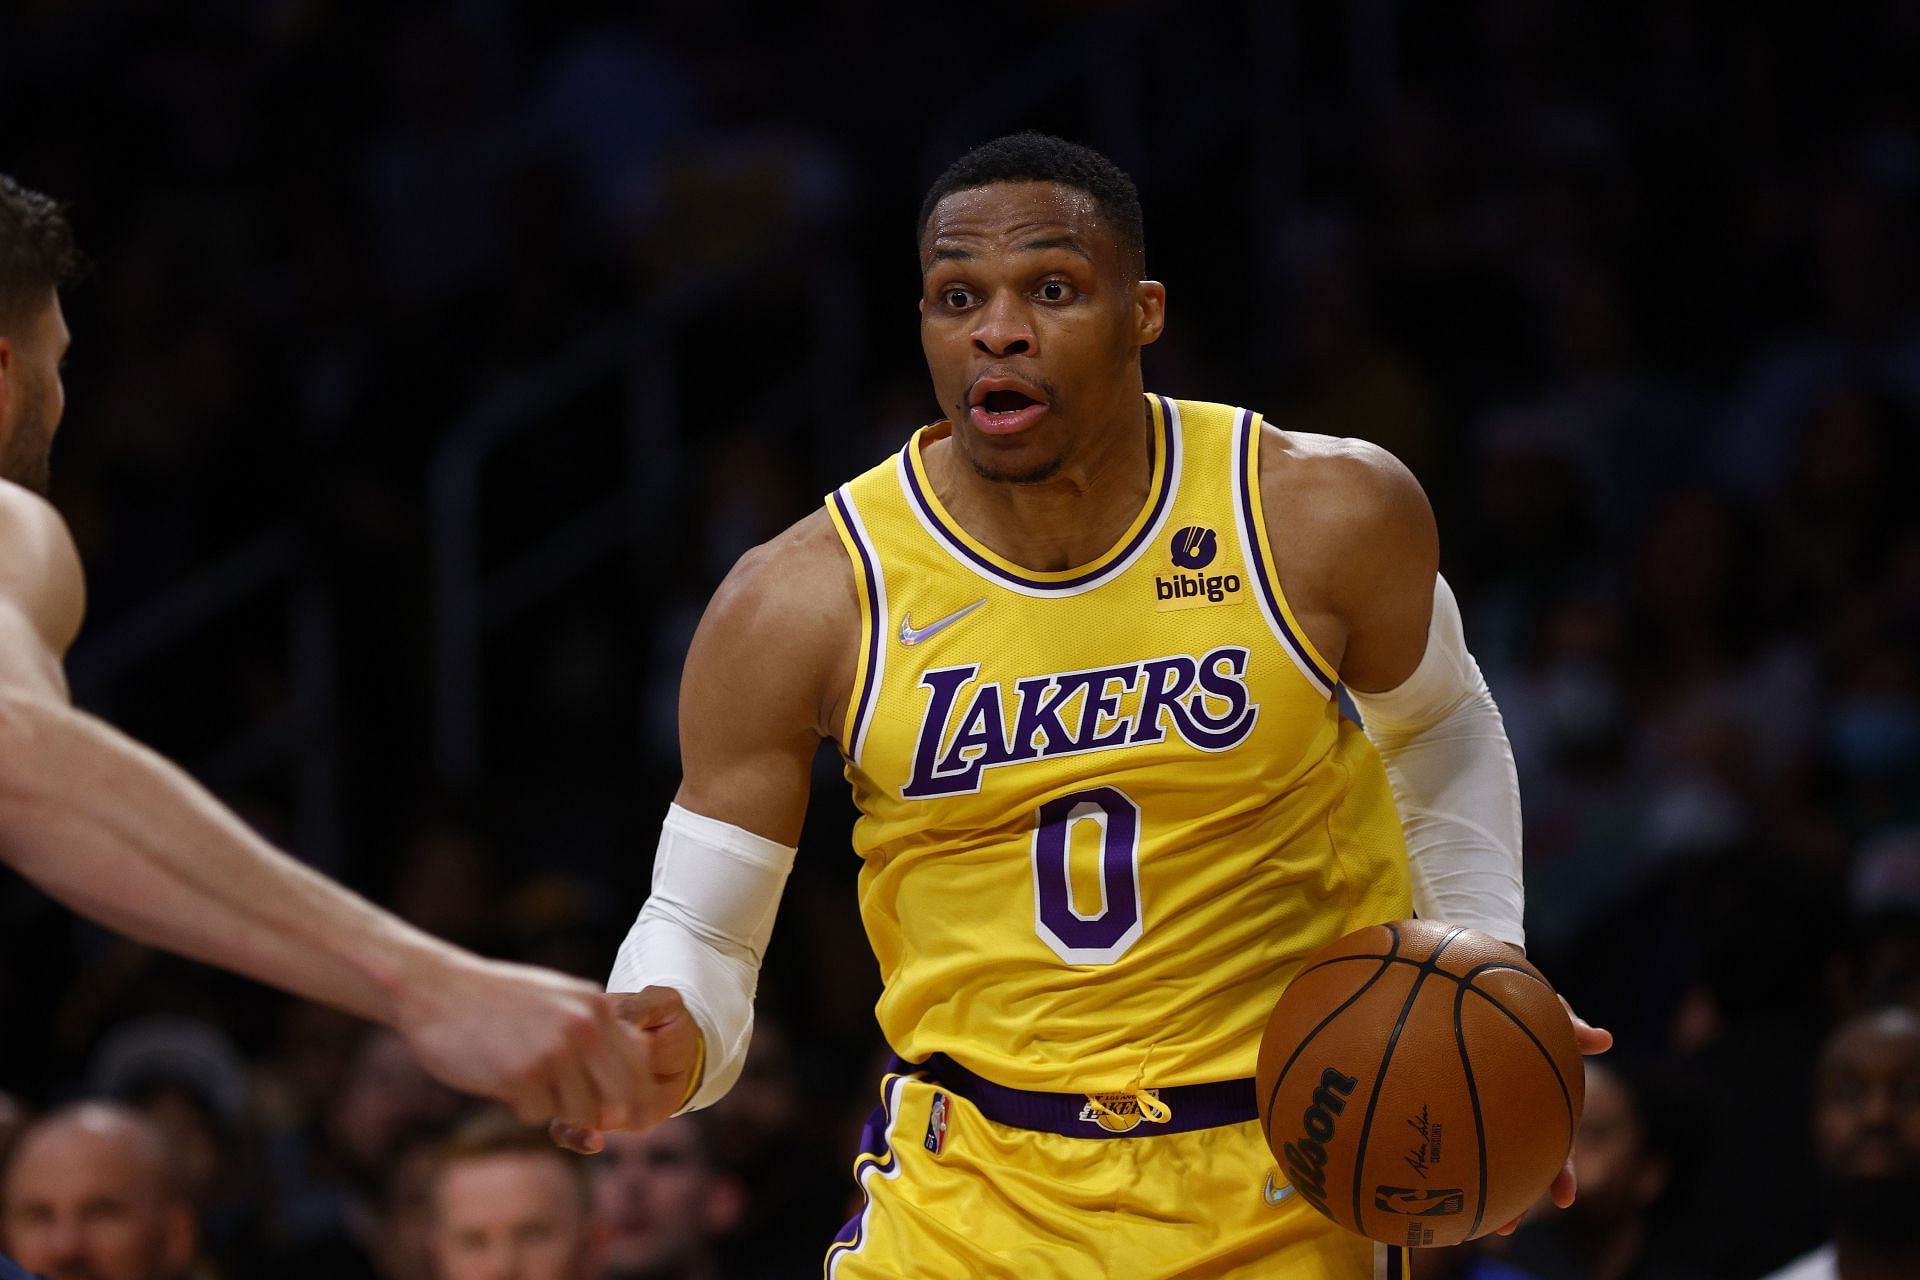 Russell Westbrook #0 of the LA Lakers at Crypto.com Arena on March 01, 2022 in Los Angeles, California.